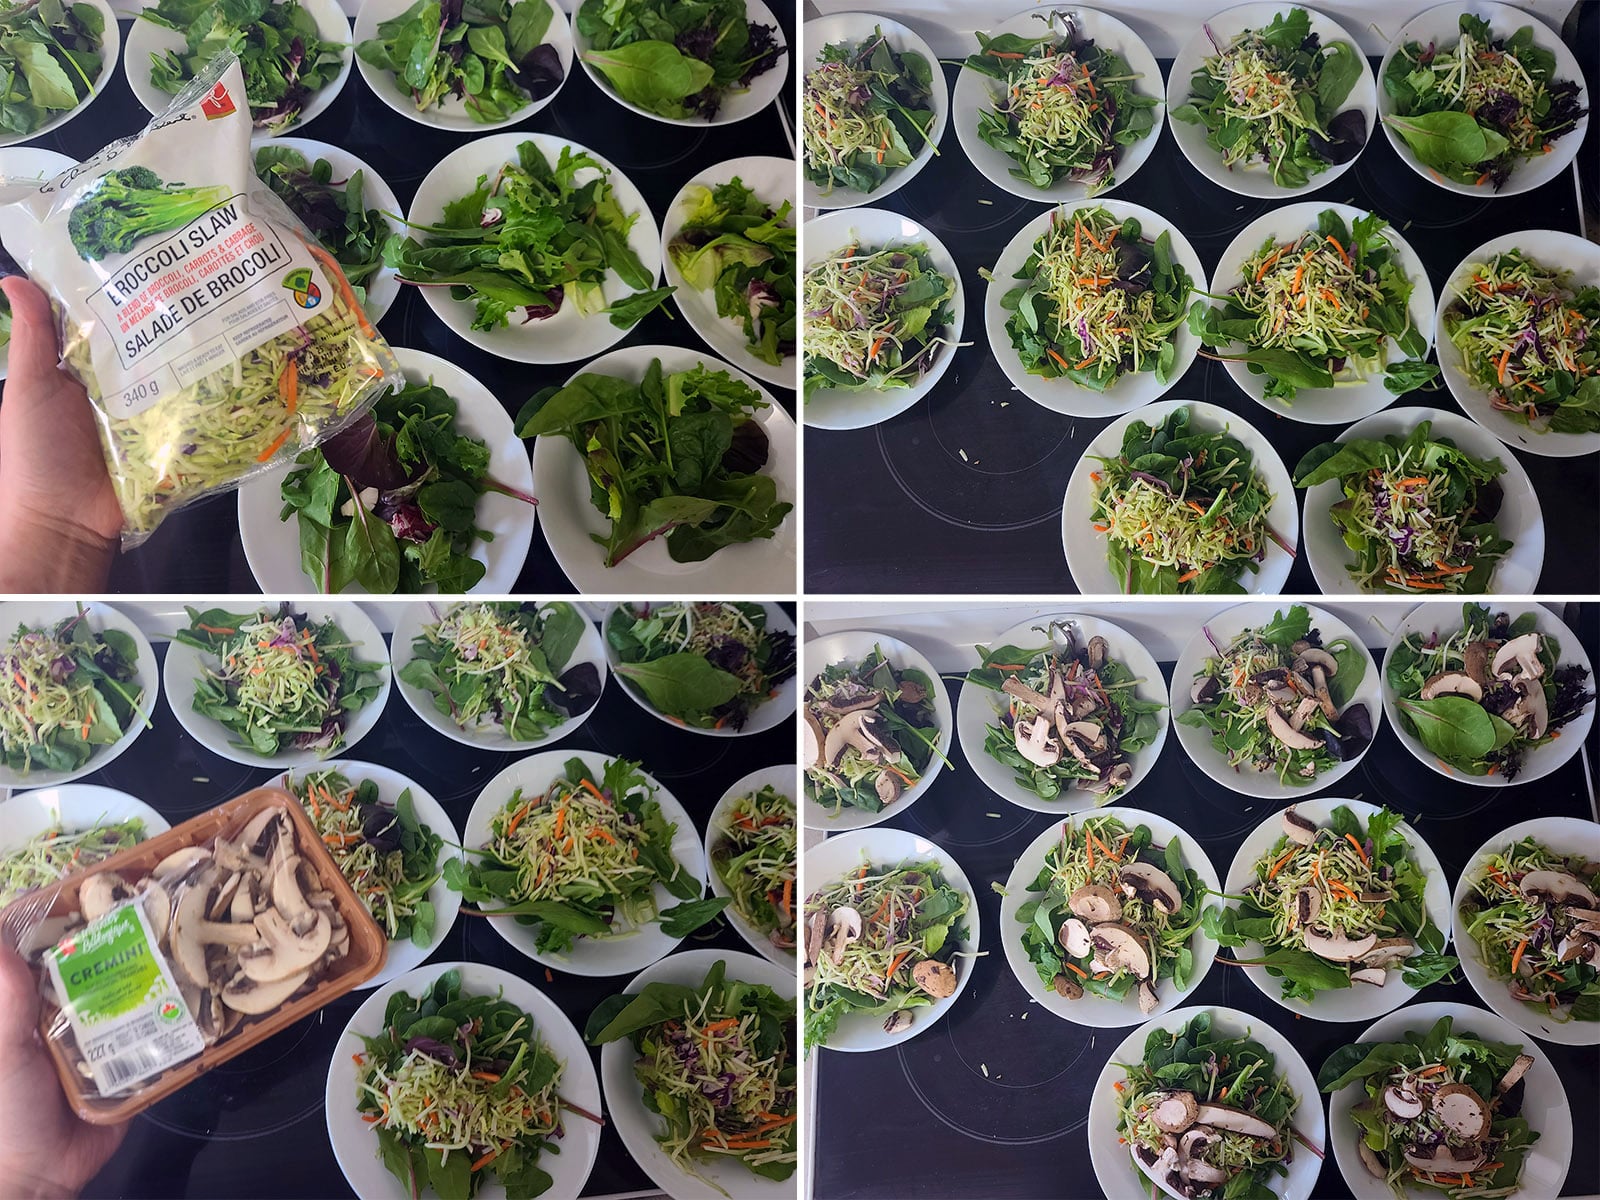 A 4 part image showing the broccoli slaw and mushrooms being added to the salads.